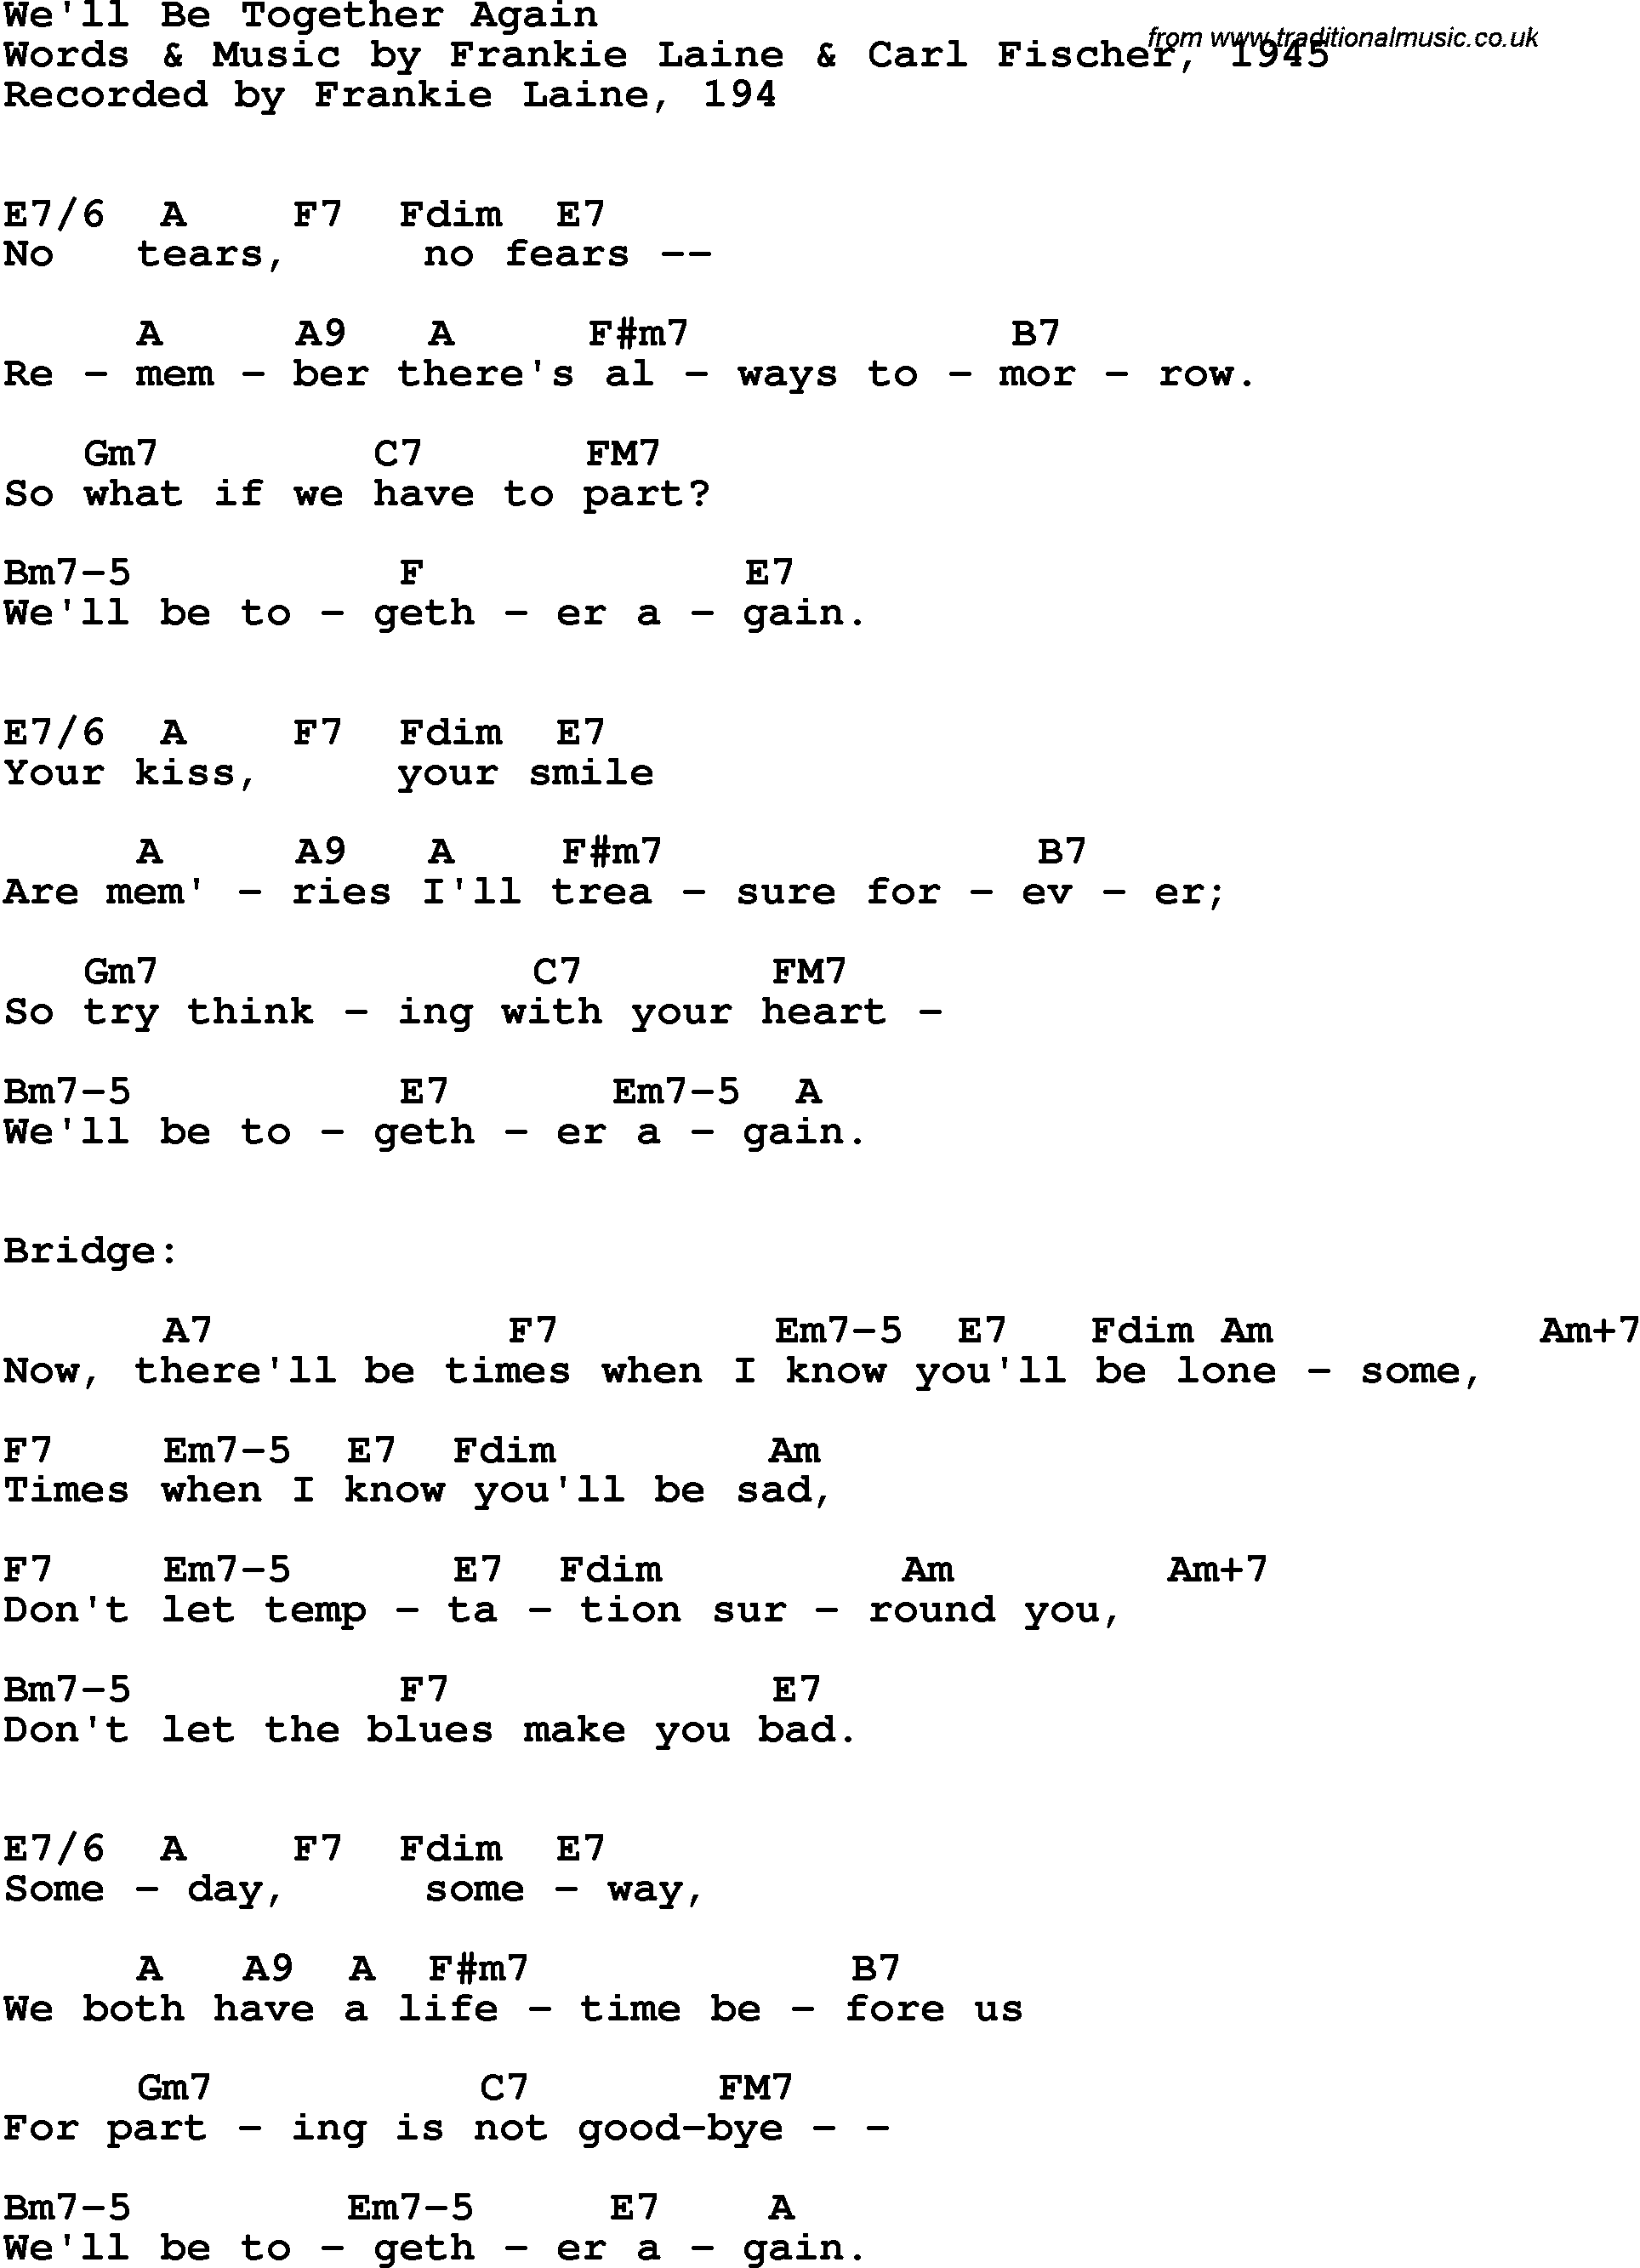 Song Lyrics with guitar chords for We'll Be Together Again- Frankie Laine, 1945